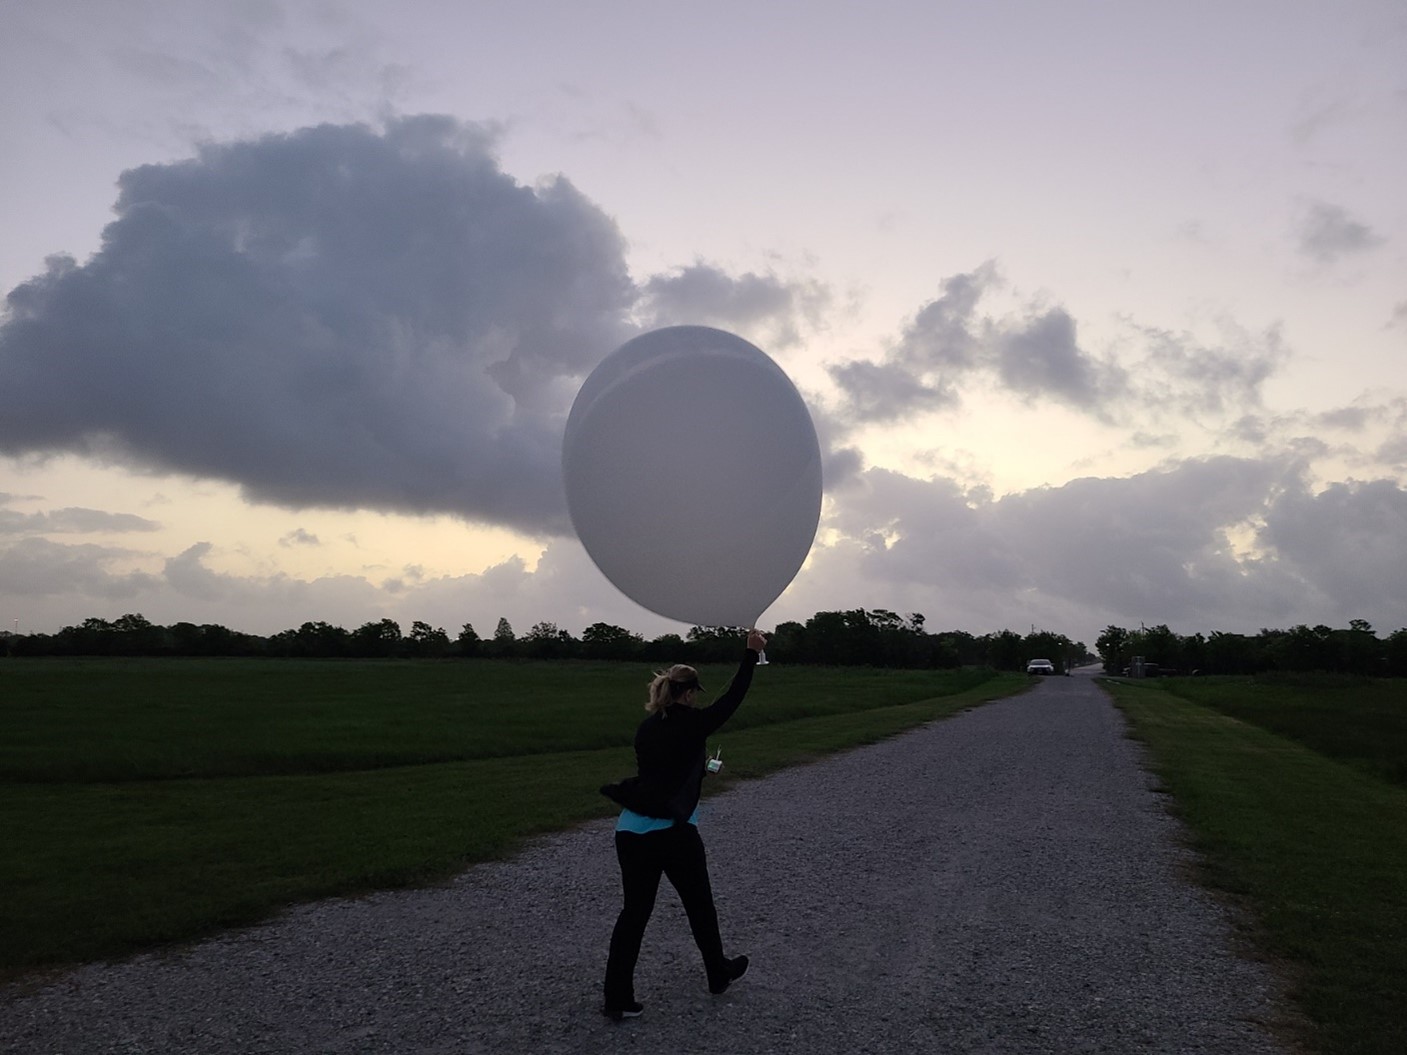 ARM releases a weather balloon from its La Porte site every six hours. On the morning of April 23, 2022, Michelle Kiani launches a balloon at the site. Photo is by Mark Spychala, Hamelmann Communications.